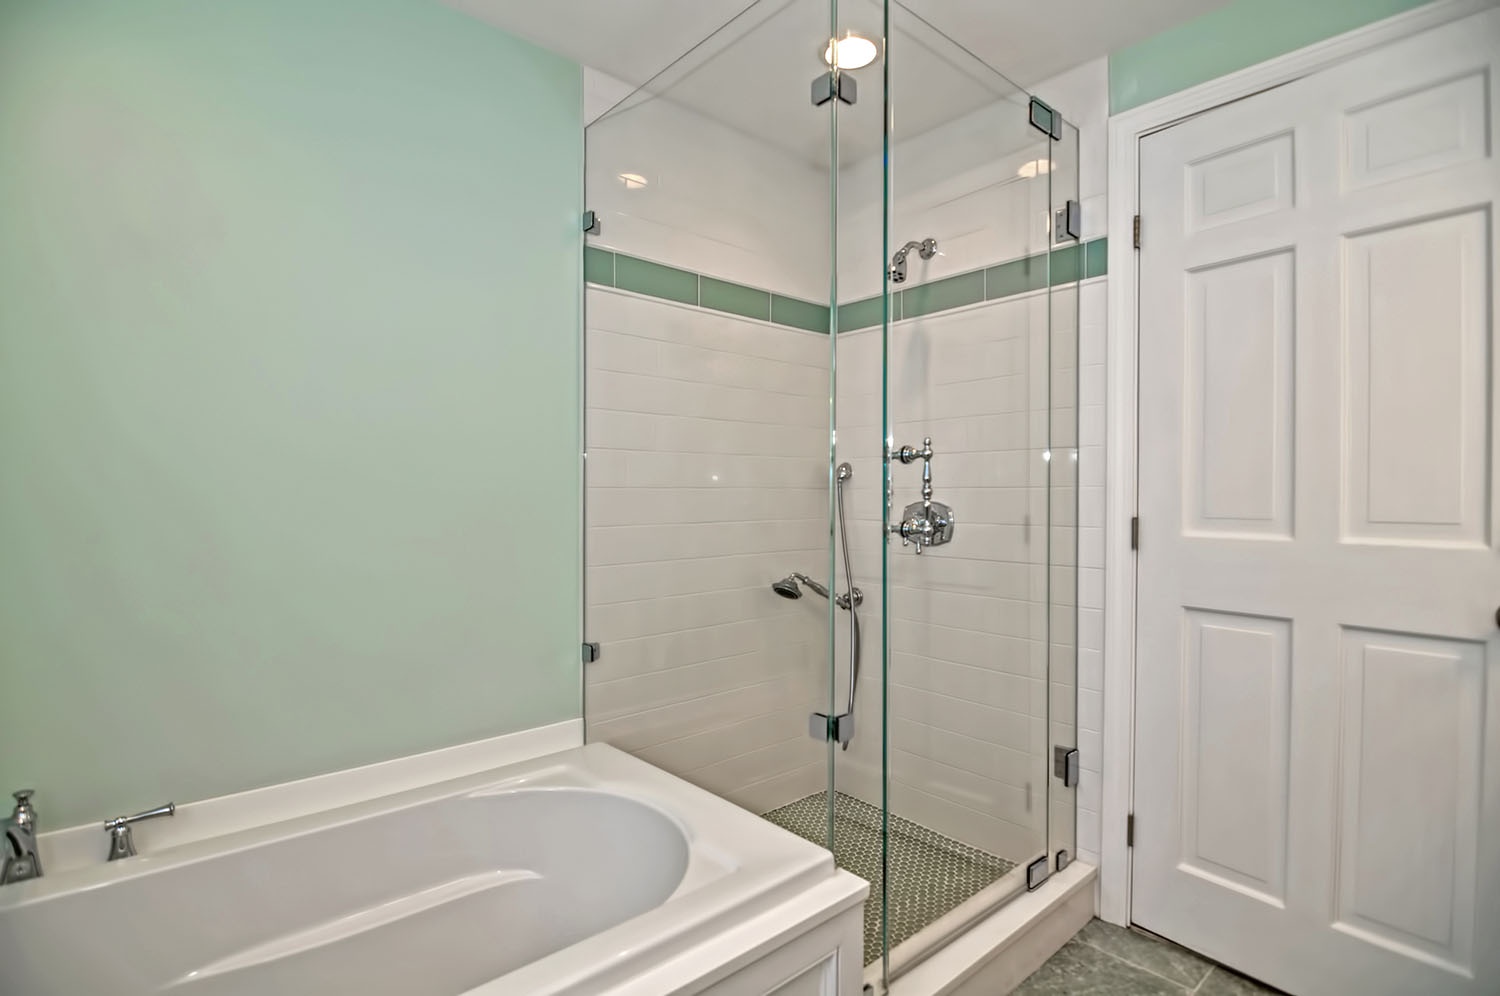 Immerse yourself in the large soaking tub.